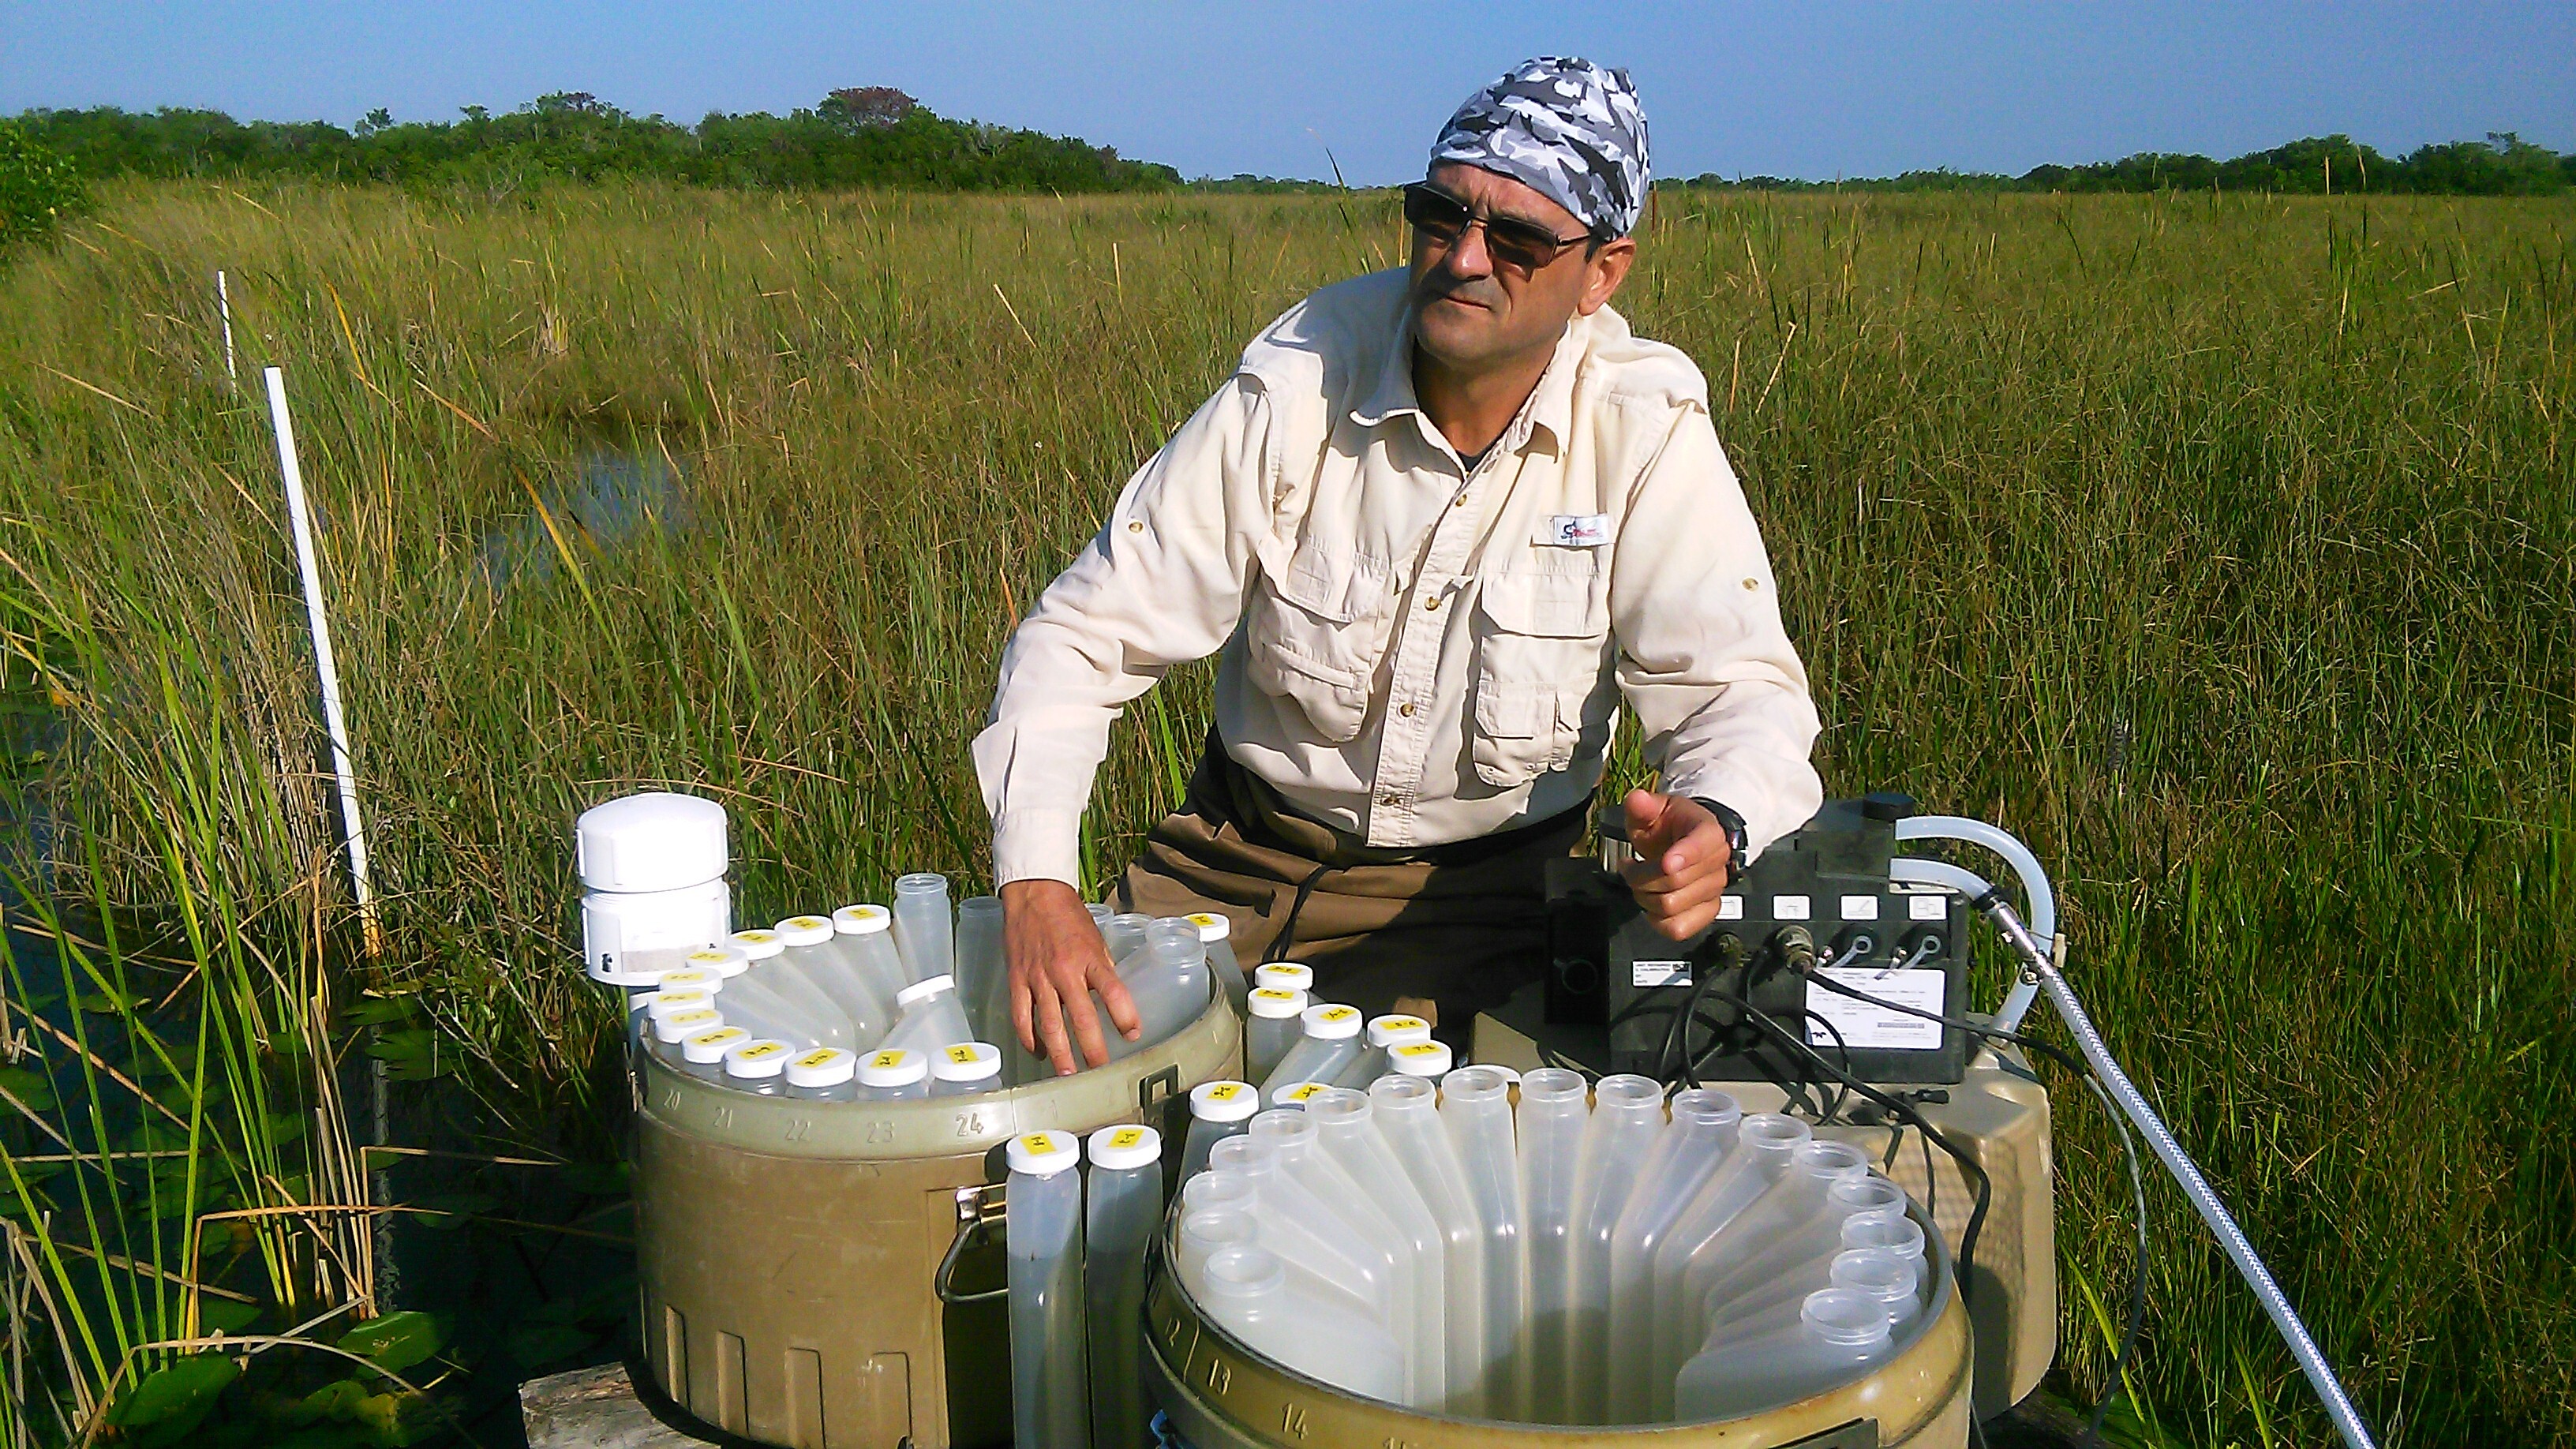 Rafael Traveiso collecting water samples from the autosampler at SRS-3, Shark River Slough